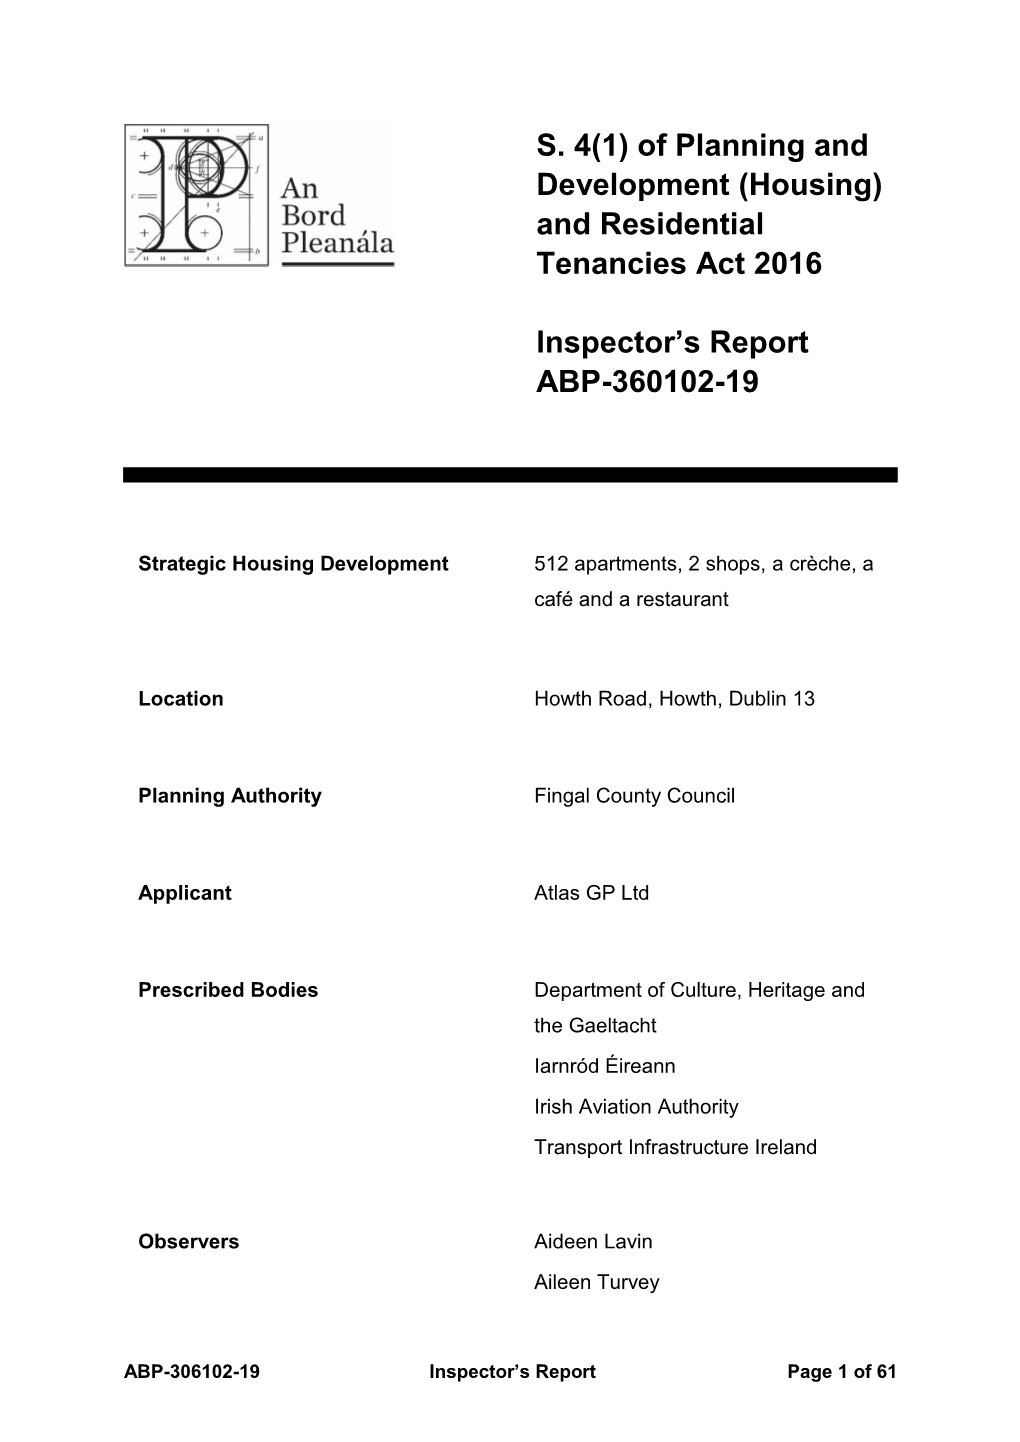 And Residential Tenancies Act 2016 Inspector's Report ABP-360102-19